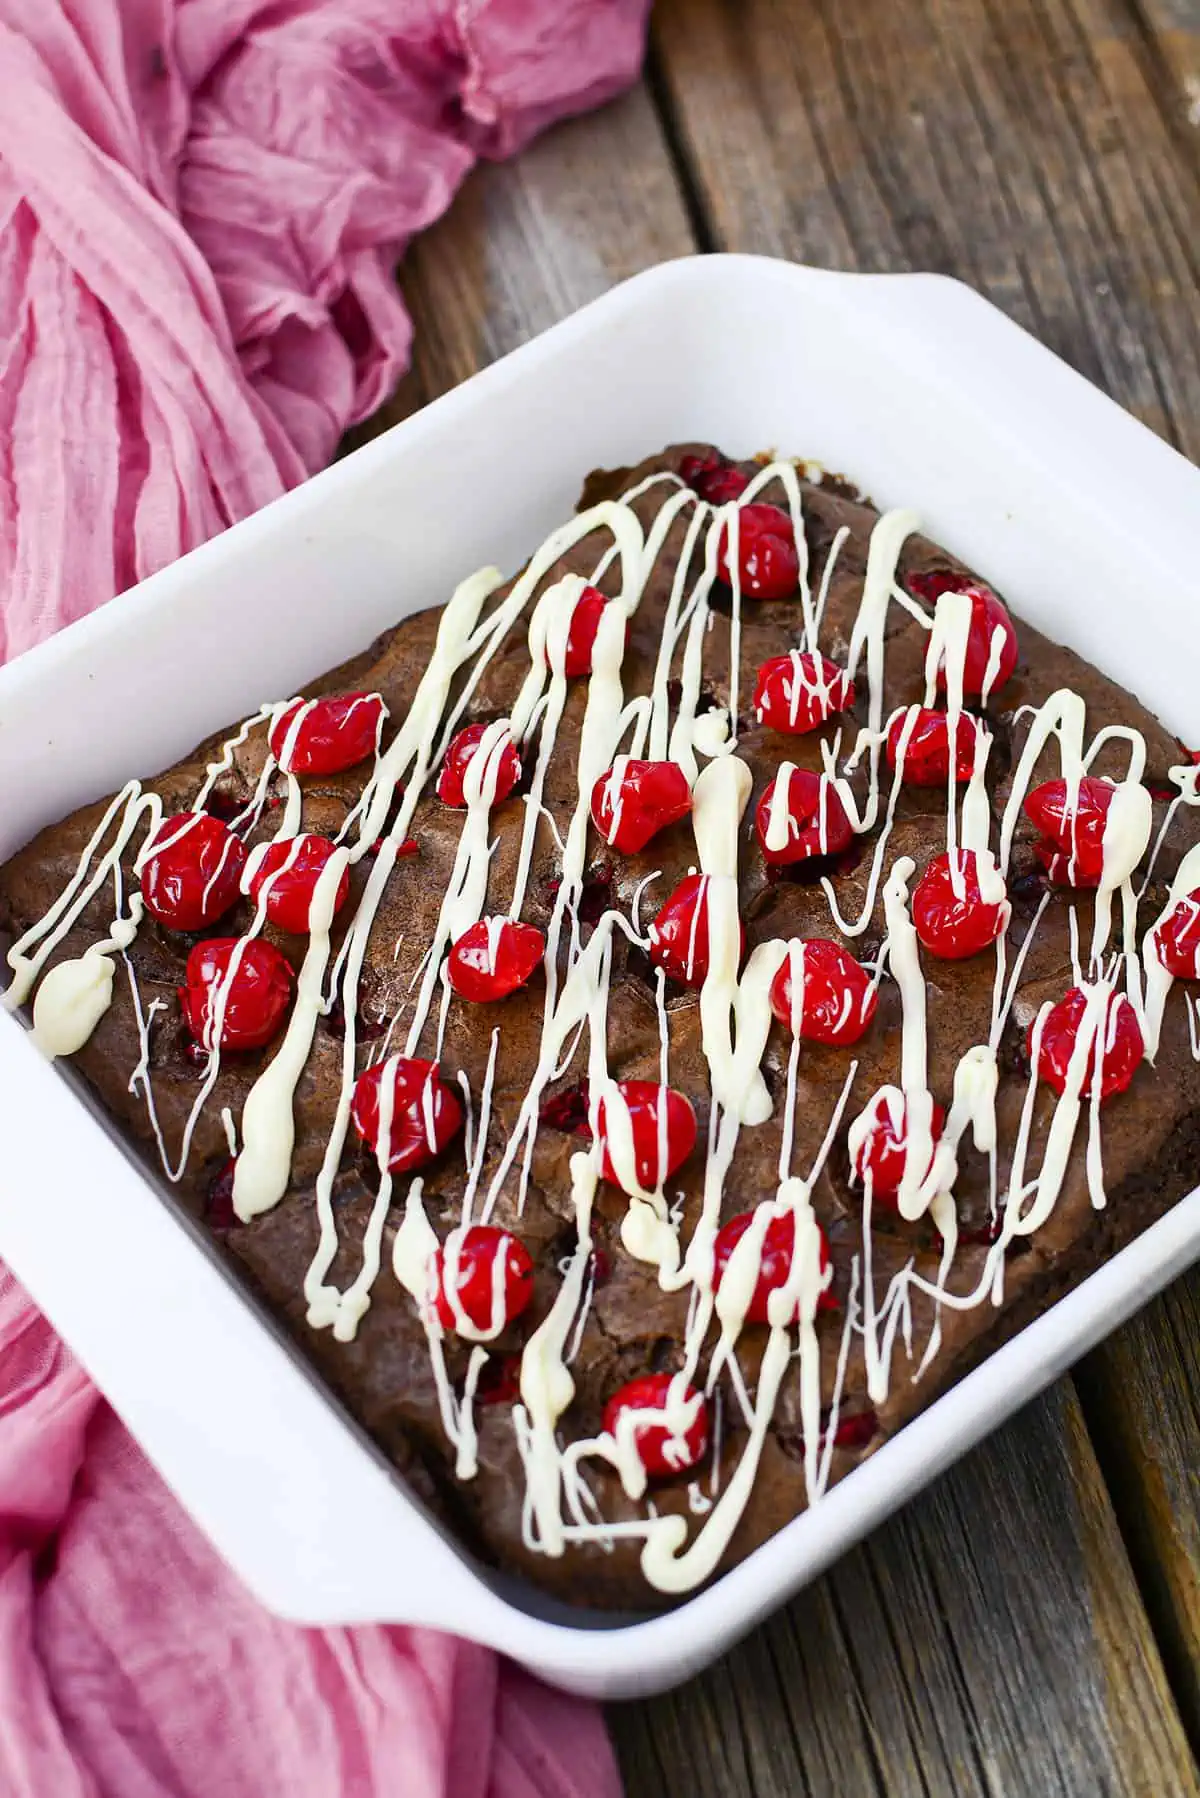 Chocolate cherry brownies covered in white chocolate drizzle and maraschino cherries, baked in a white caserole dish